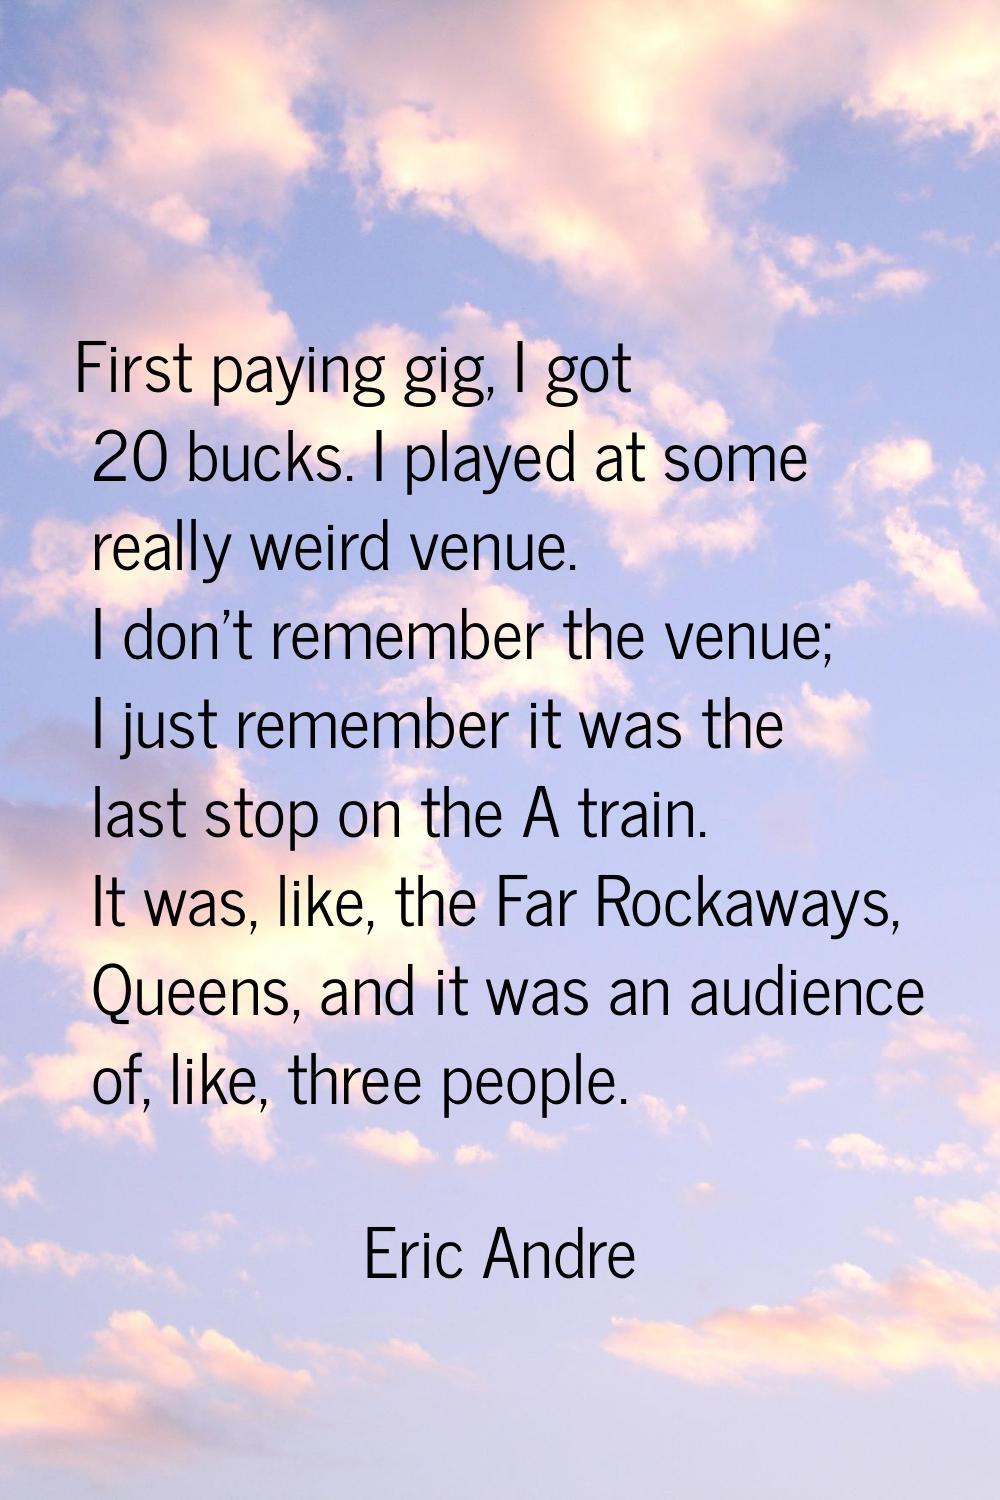 First paying gig, I got 20 bucks. I played at some really weird venue. I don't remember the venue; 